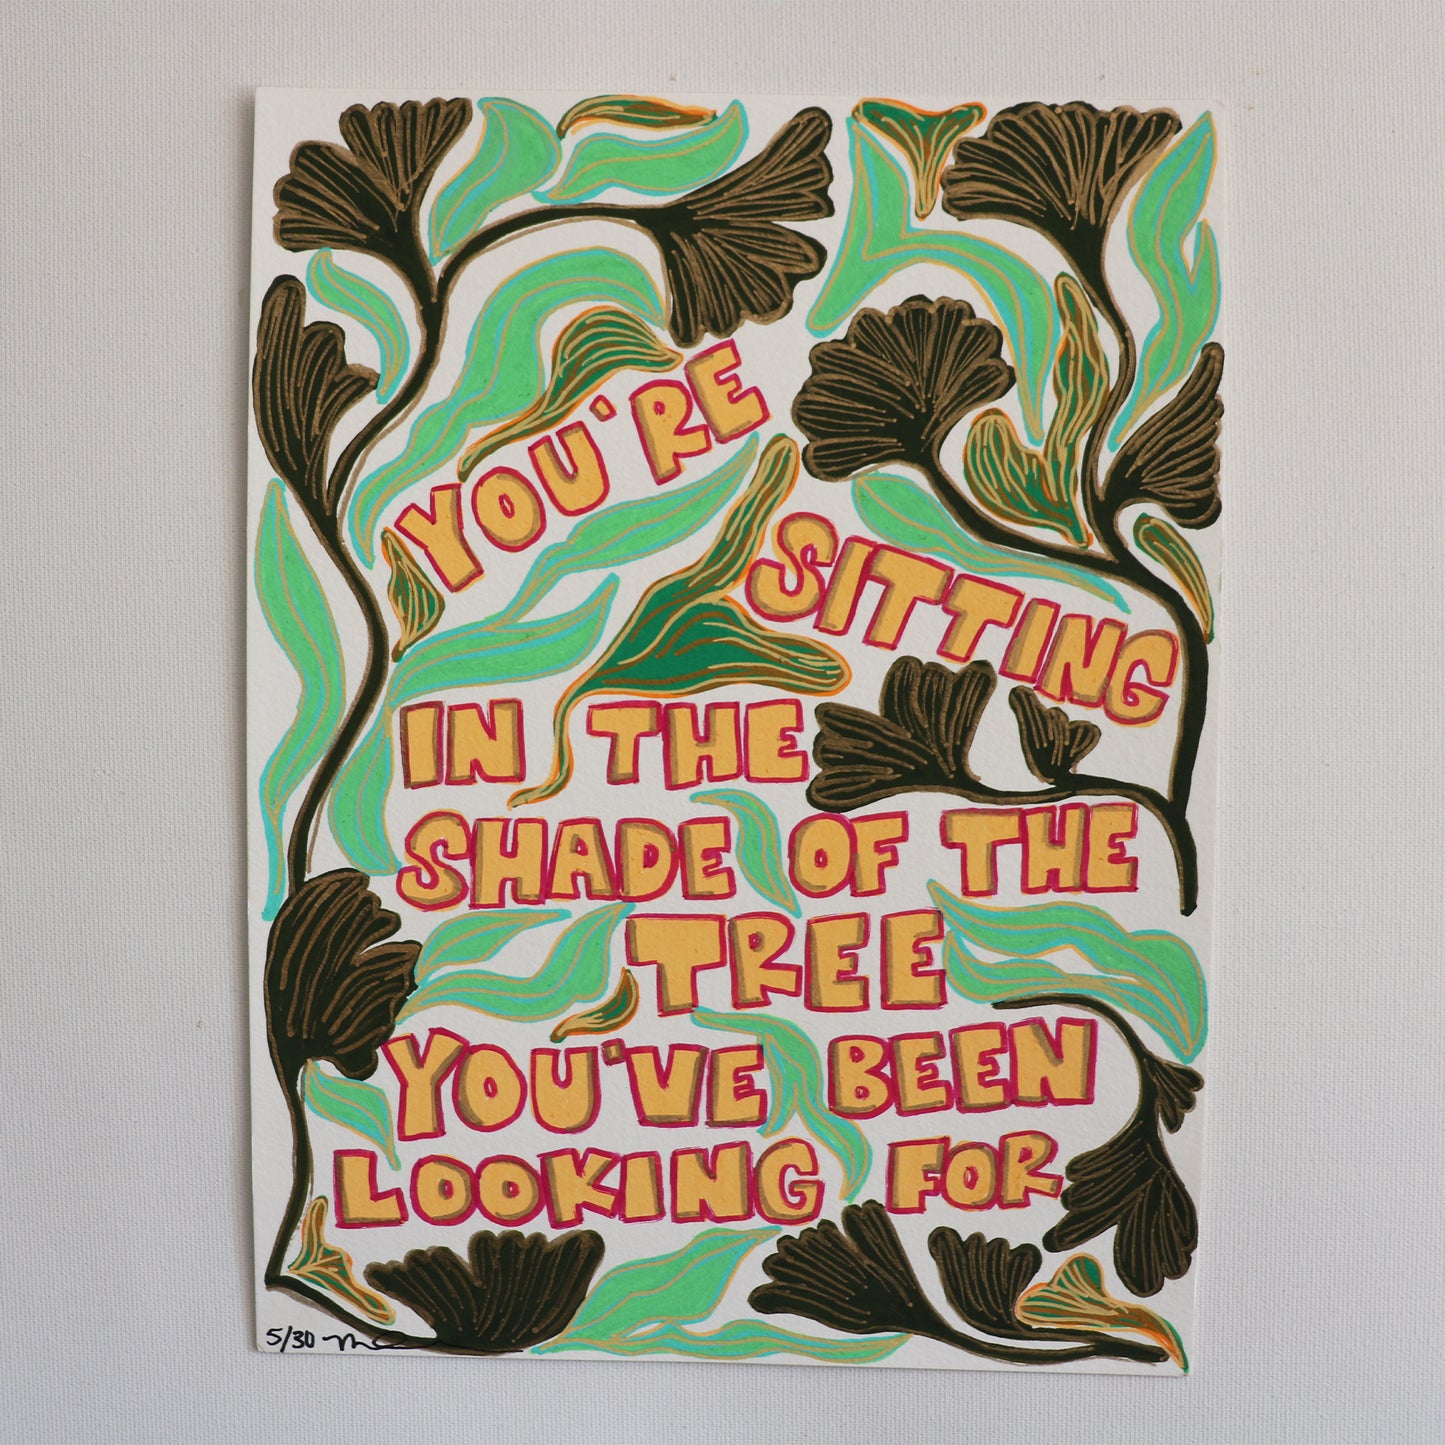 Print of Little Delight #5: You're Sitting in the Shade of the Tree